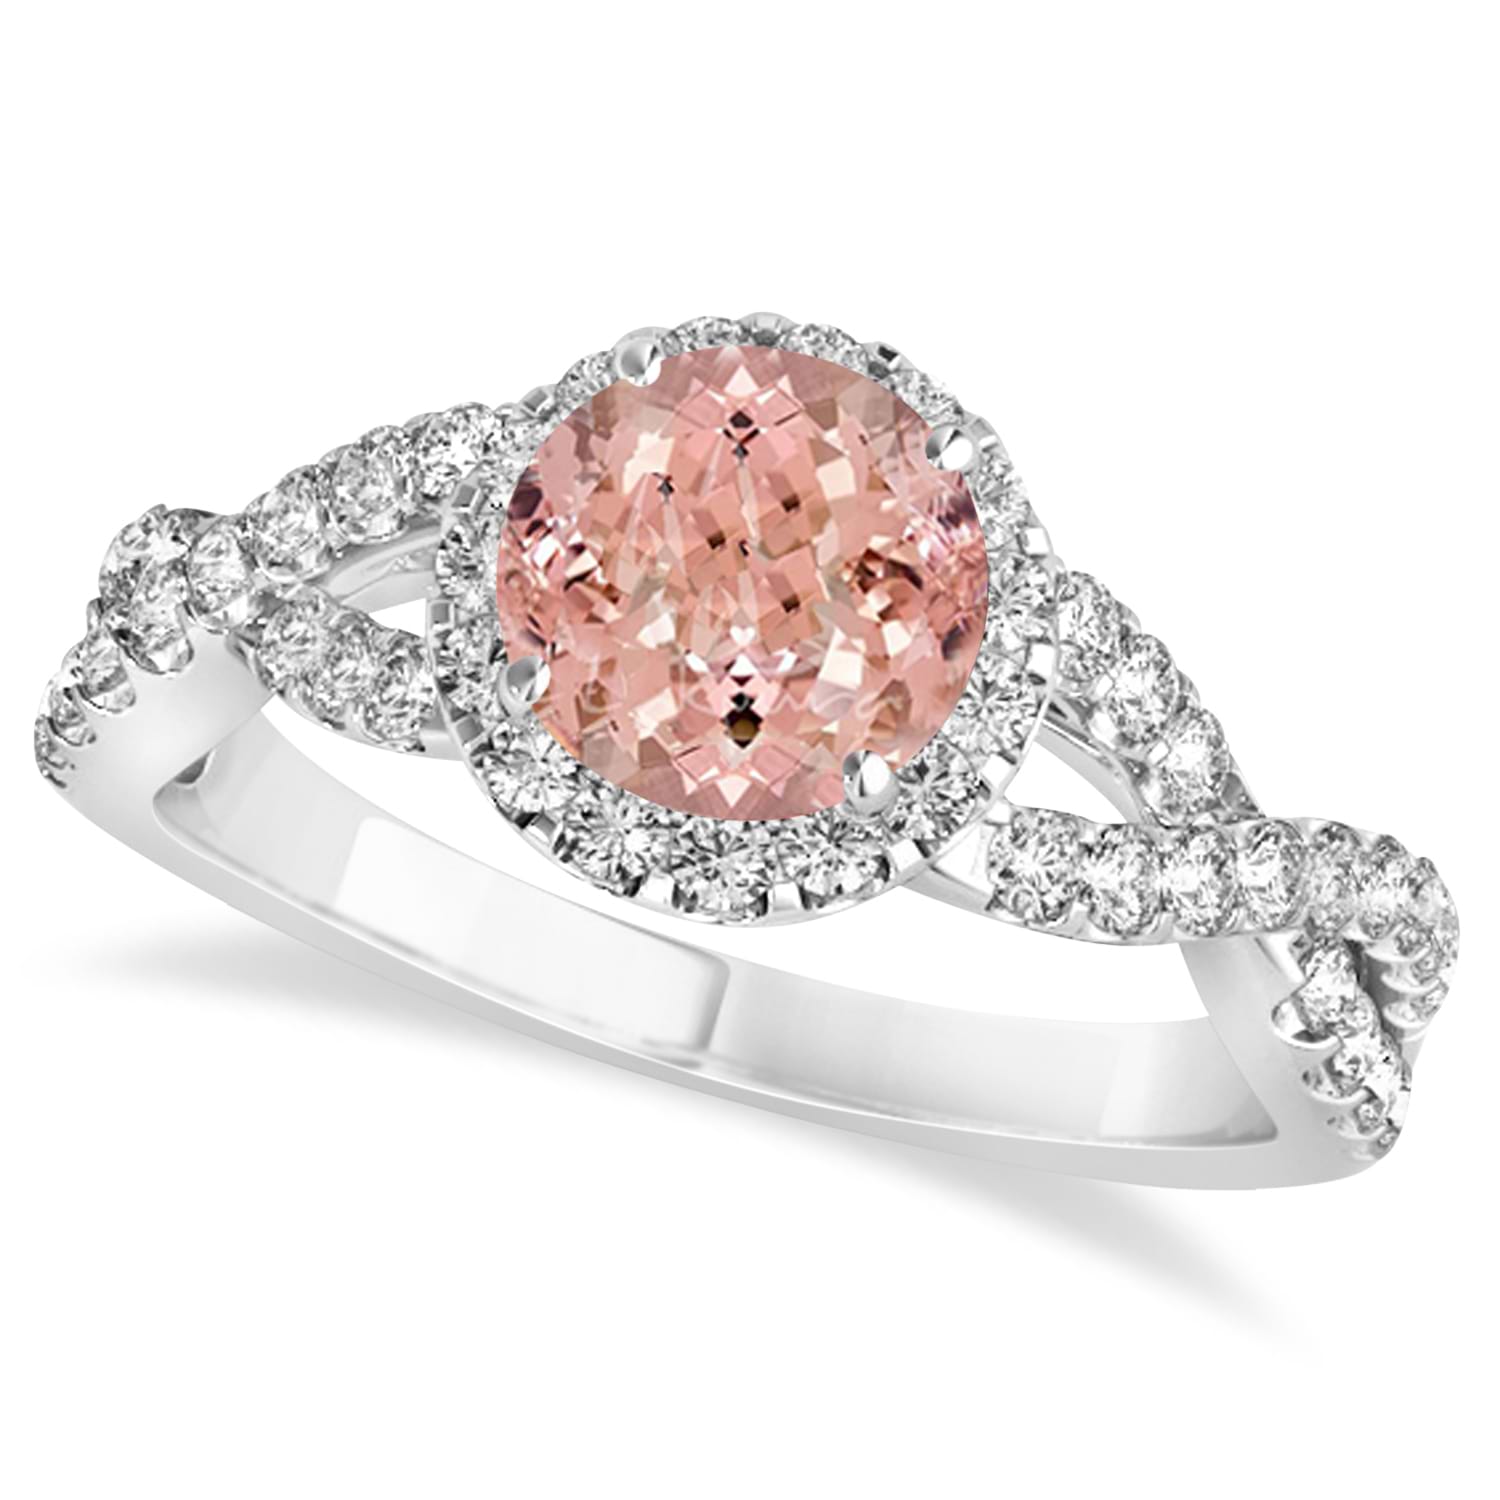 Oval Morganite Engagement Ring with Diamond Halo 14k White Gold 1.50ct -  RE889